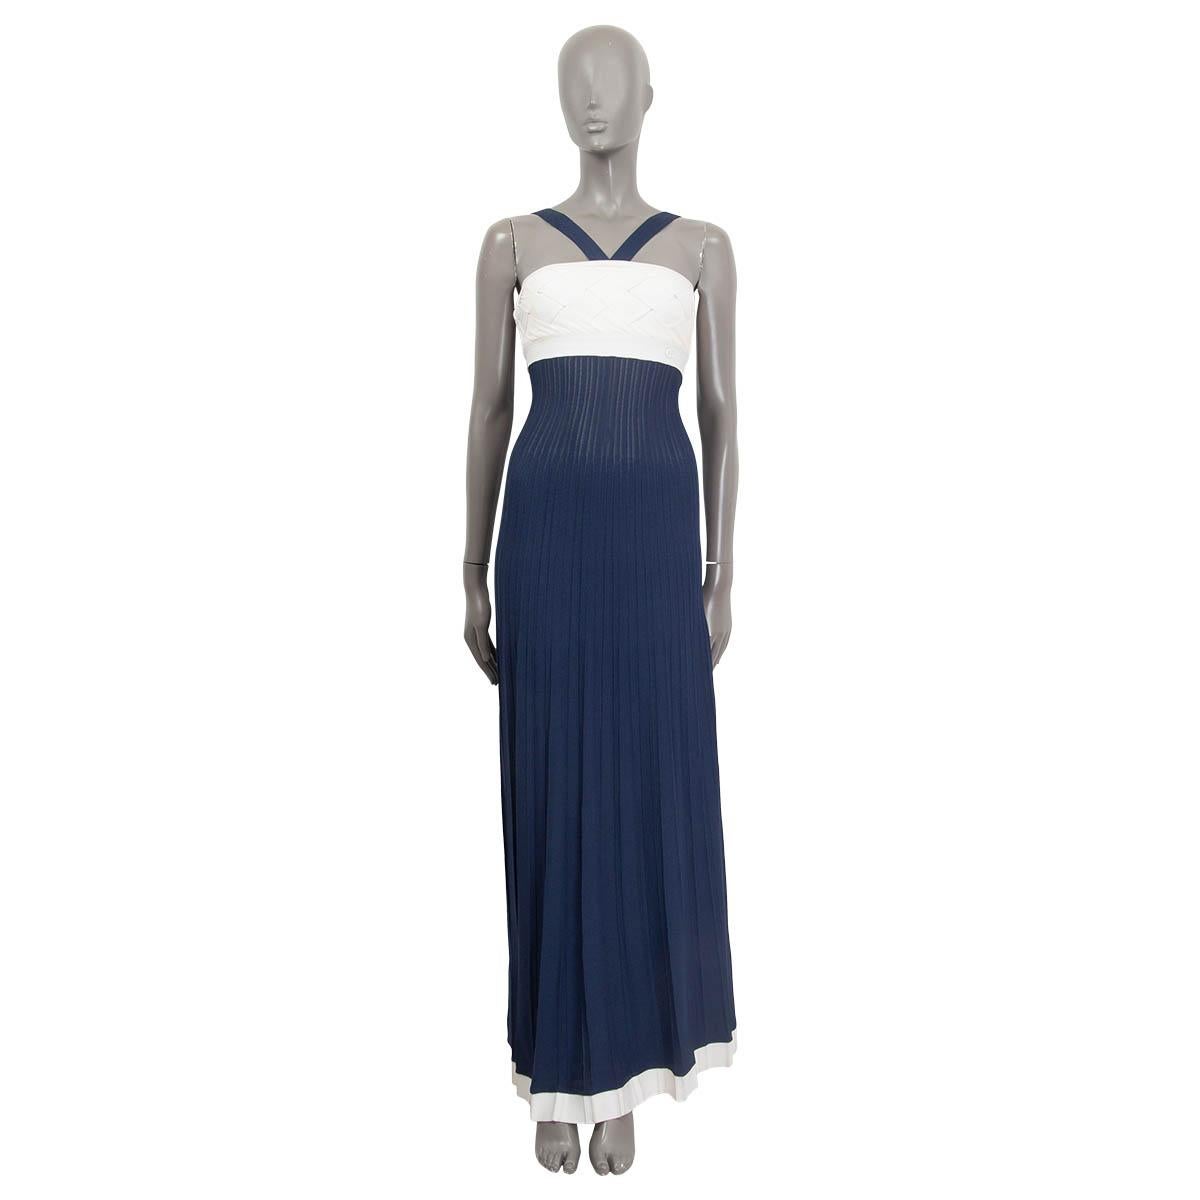 100% authentic Chanel 2008 semi sheer maxi dress in navy blue and off-white rayon (80%), nylon (17%) and spandex (3%). Features a halter neck and a 'CC' emblem on the front. Straps open with two buttons on the back. Has been worn and is in excellent